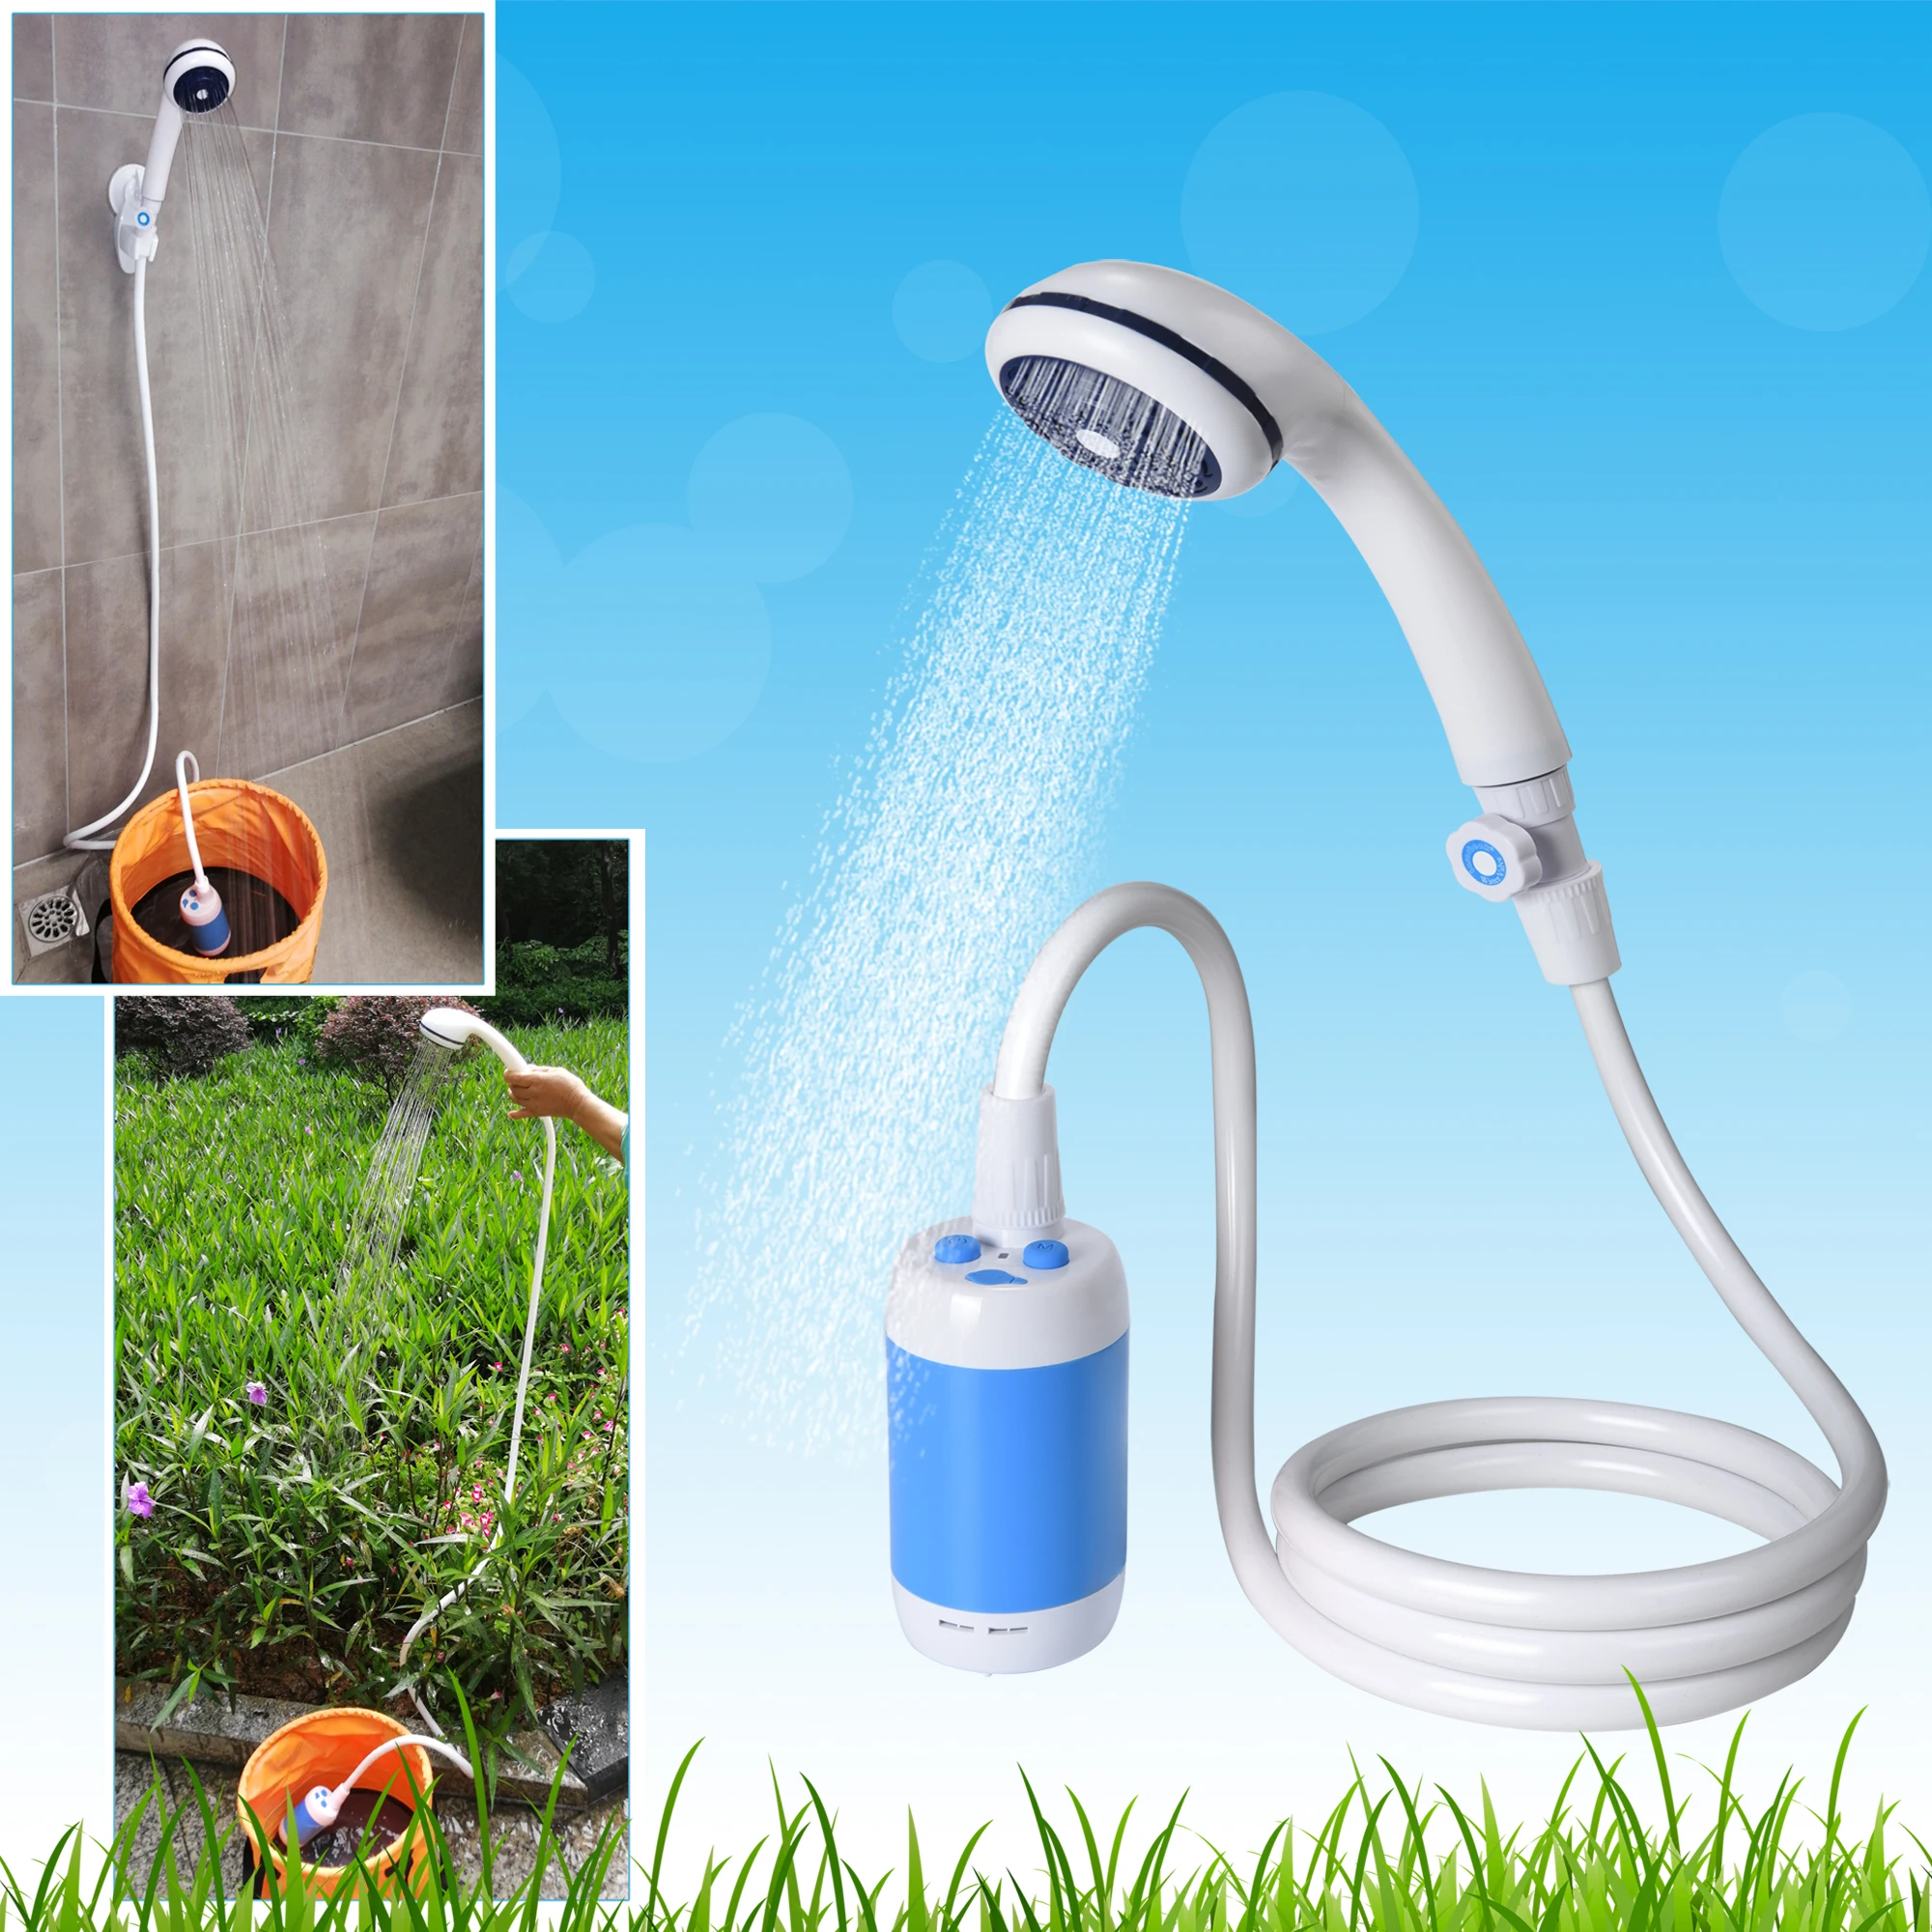 Portable Shower Camp Shower student dormitory outdoor Camping Shower pet Shower Rechargeable Shower high Capacity